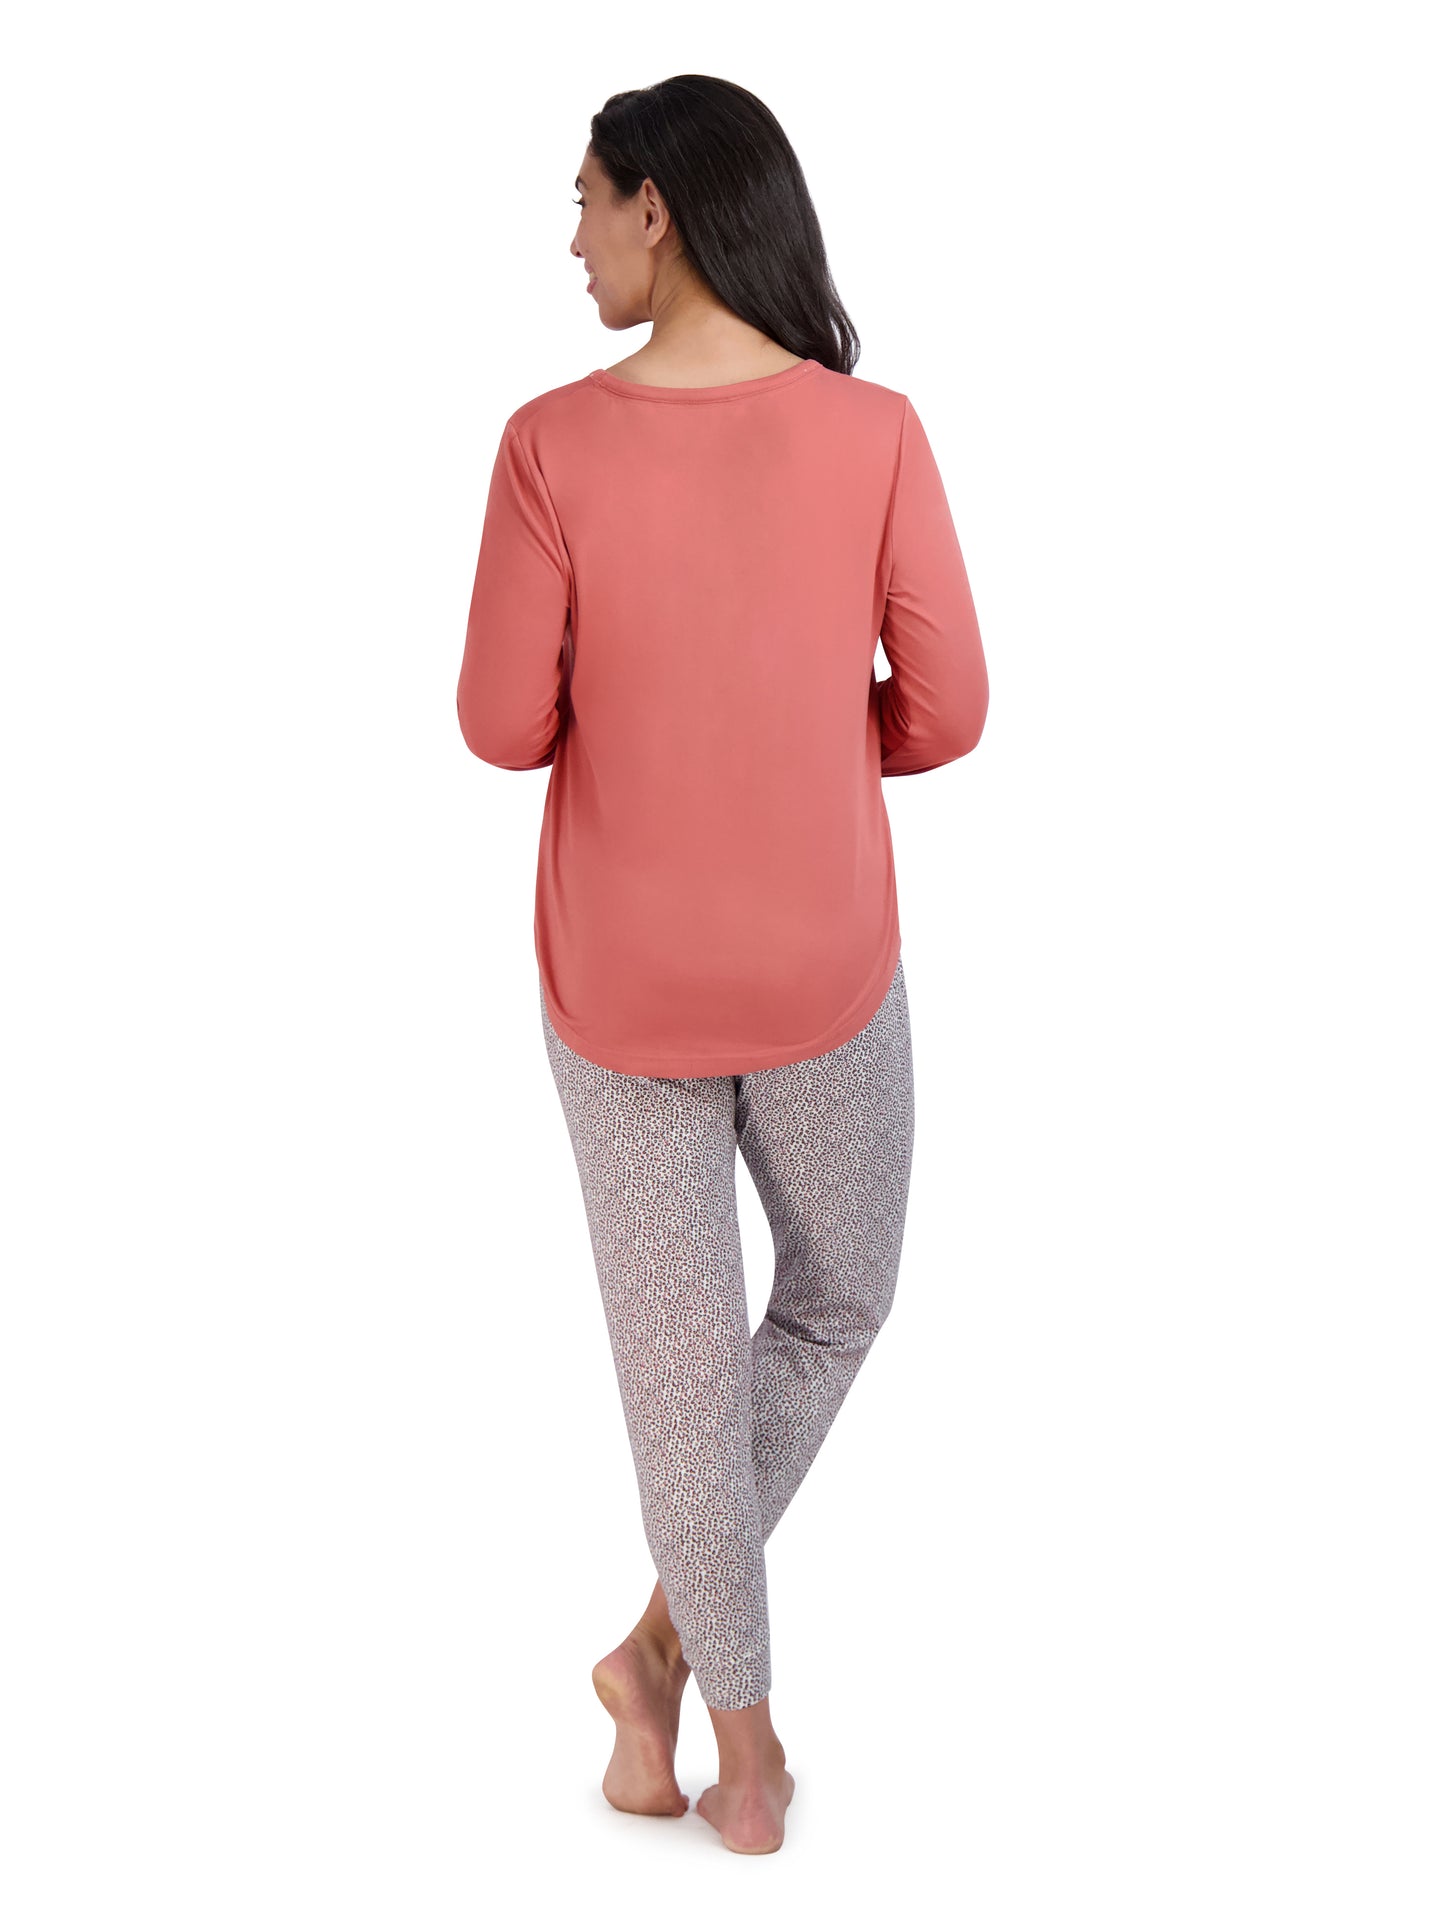 Rae Dunn Loungewear, Description: Slip into ultimate comfort with this  super soft Long Sleeve HiLo Top and Jogger Set! The soft brushed fabric,  relaxed fit and elastic waistband guarantee a cozy, flattering